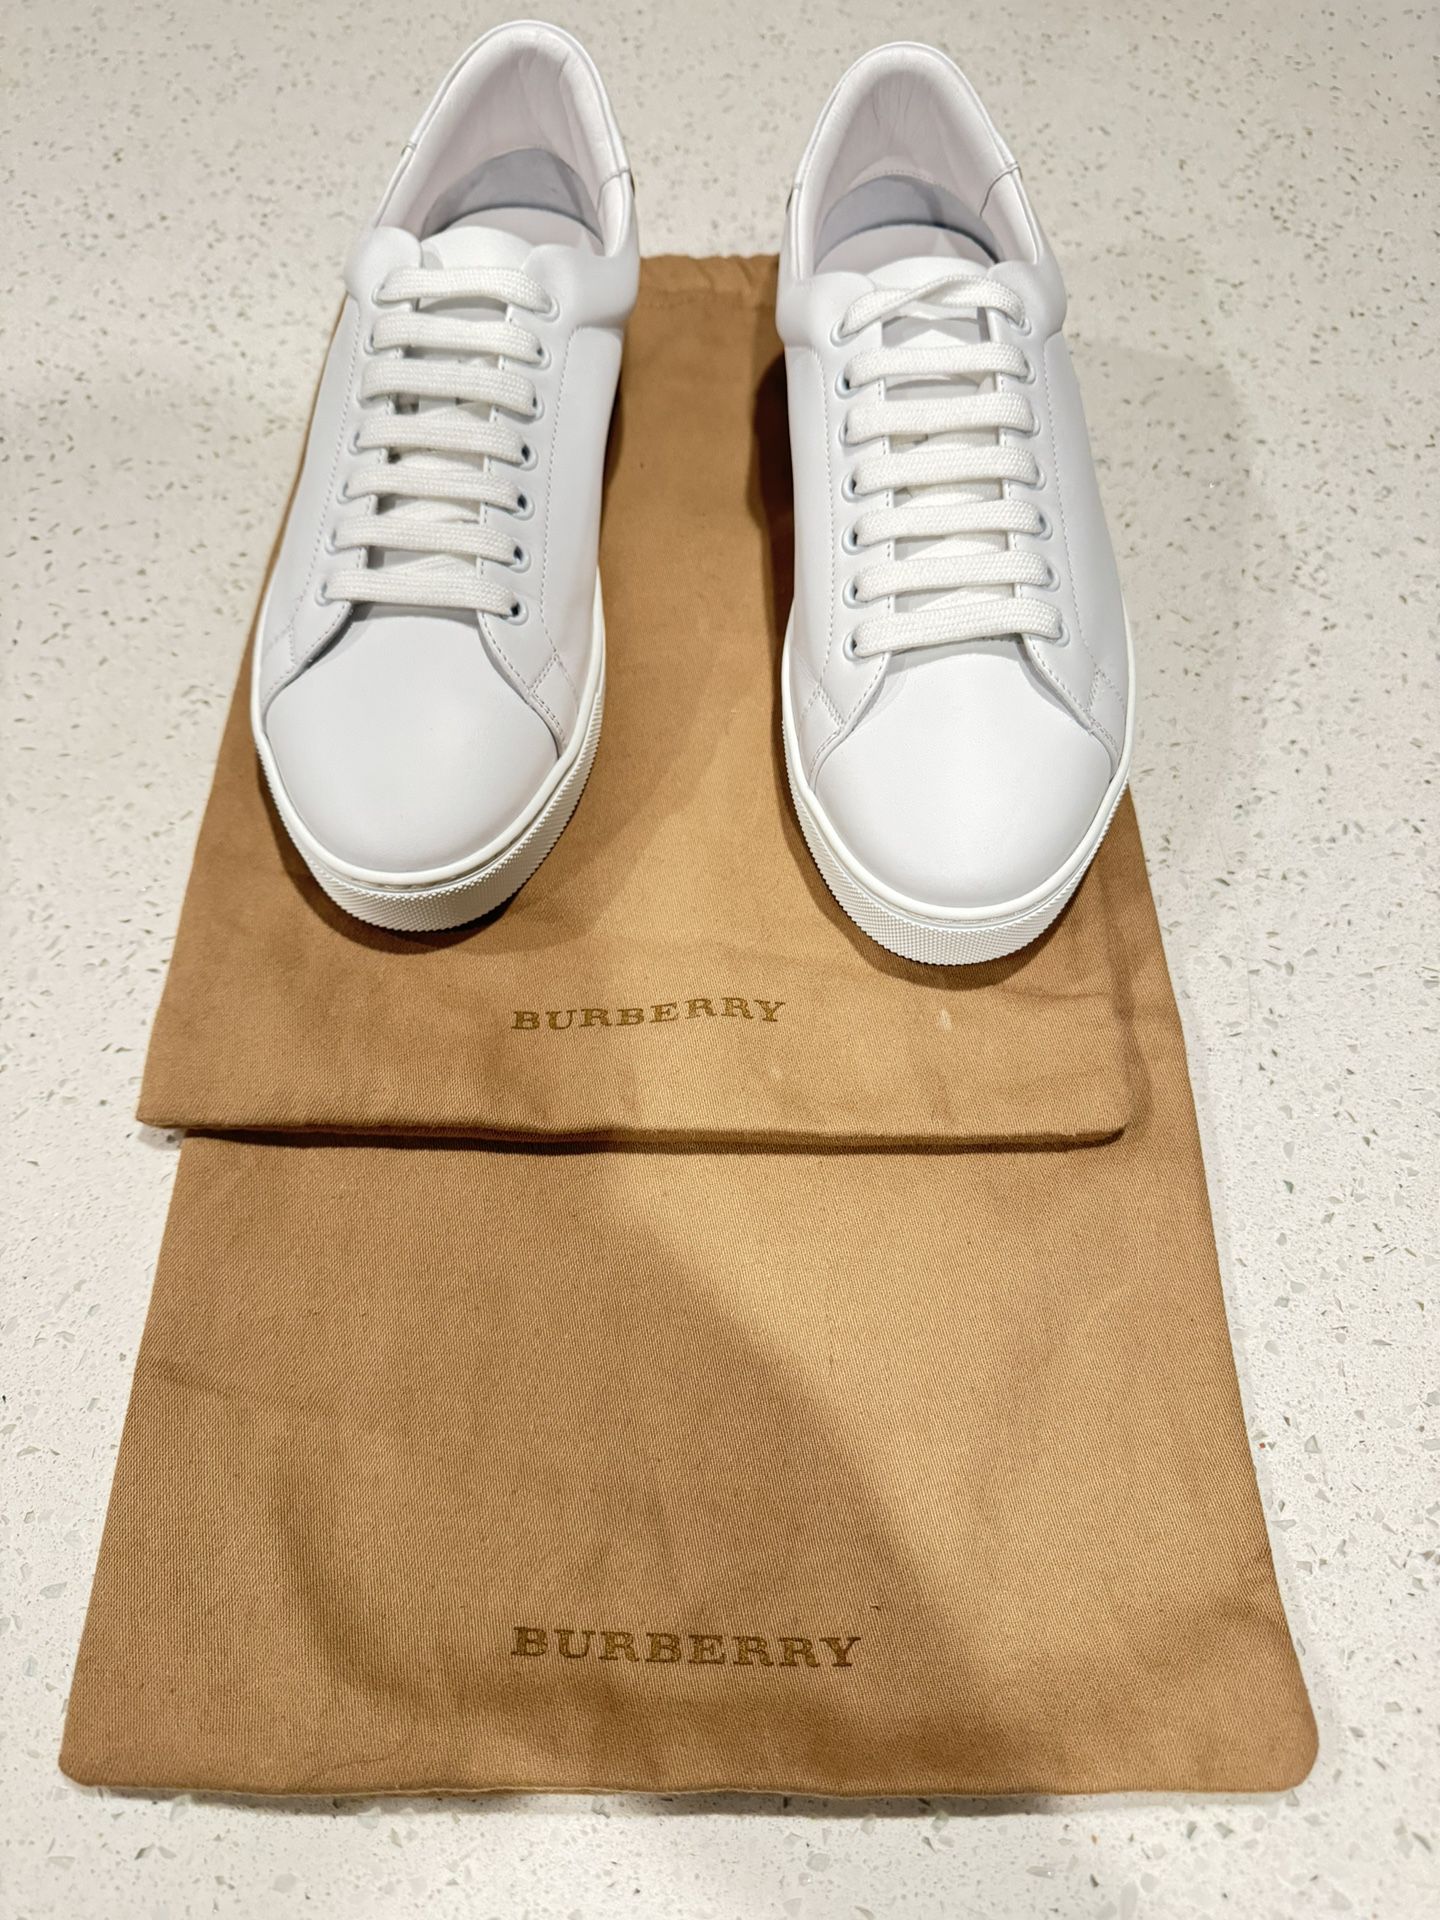 Burberry White Sneakers, Brand New Never Been Worn